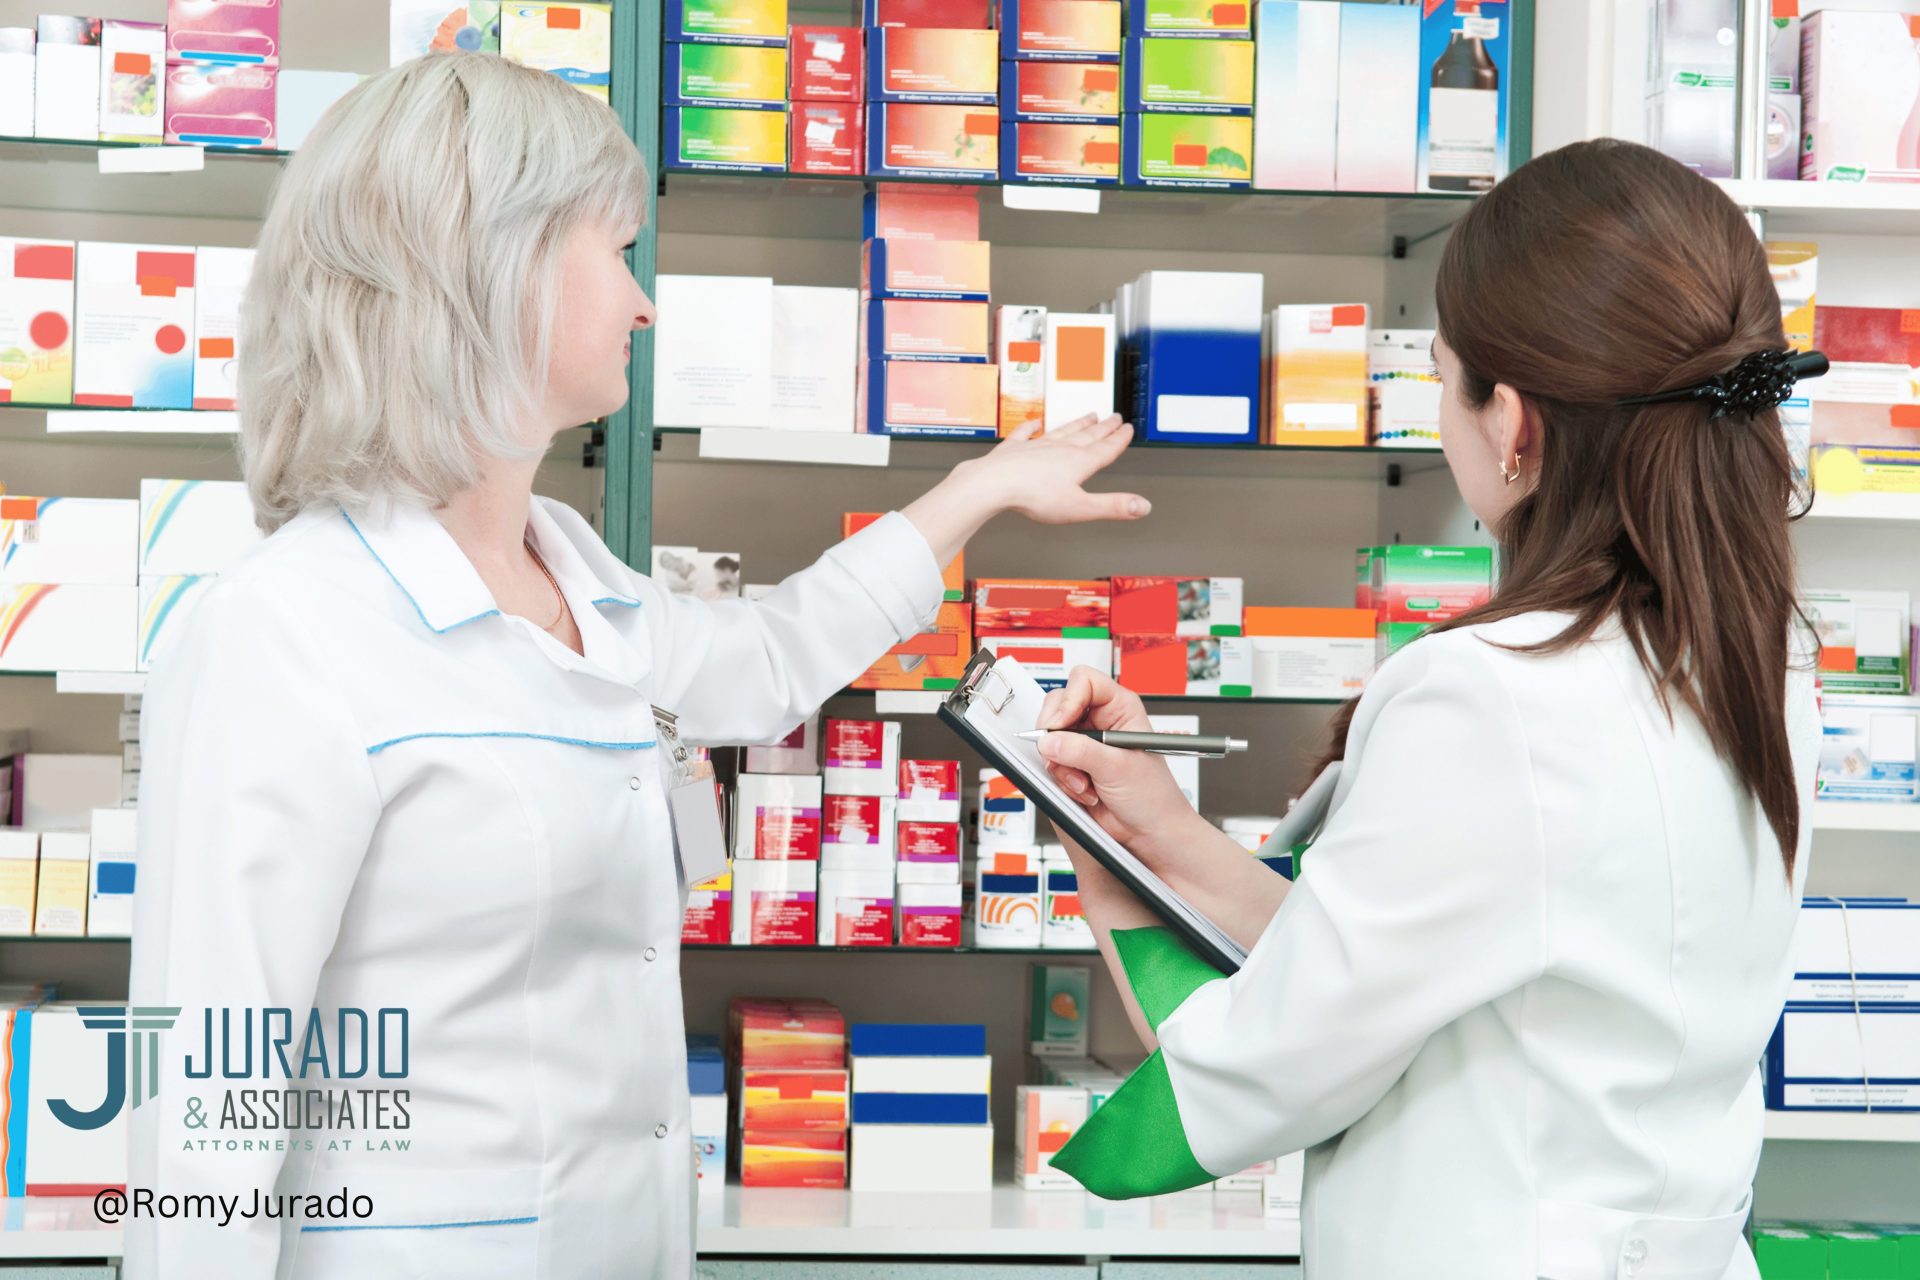 How Do I Get a Pharmacy License in Florida?